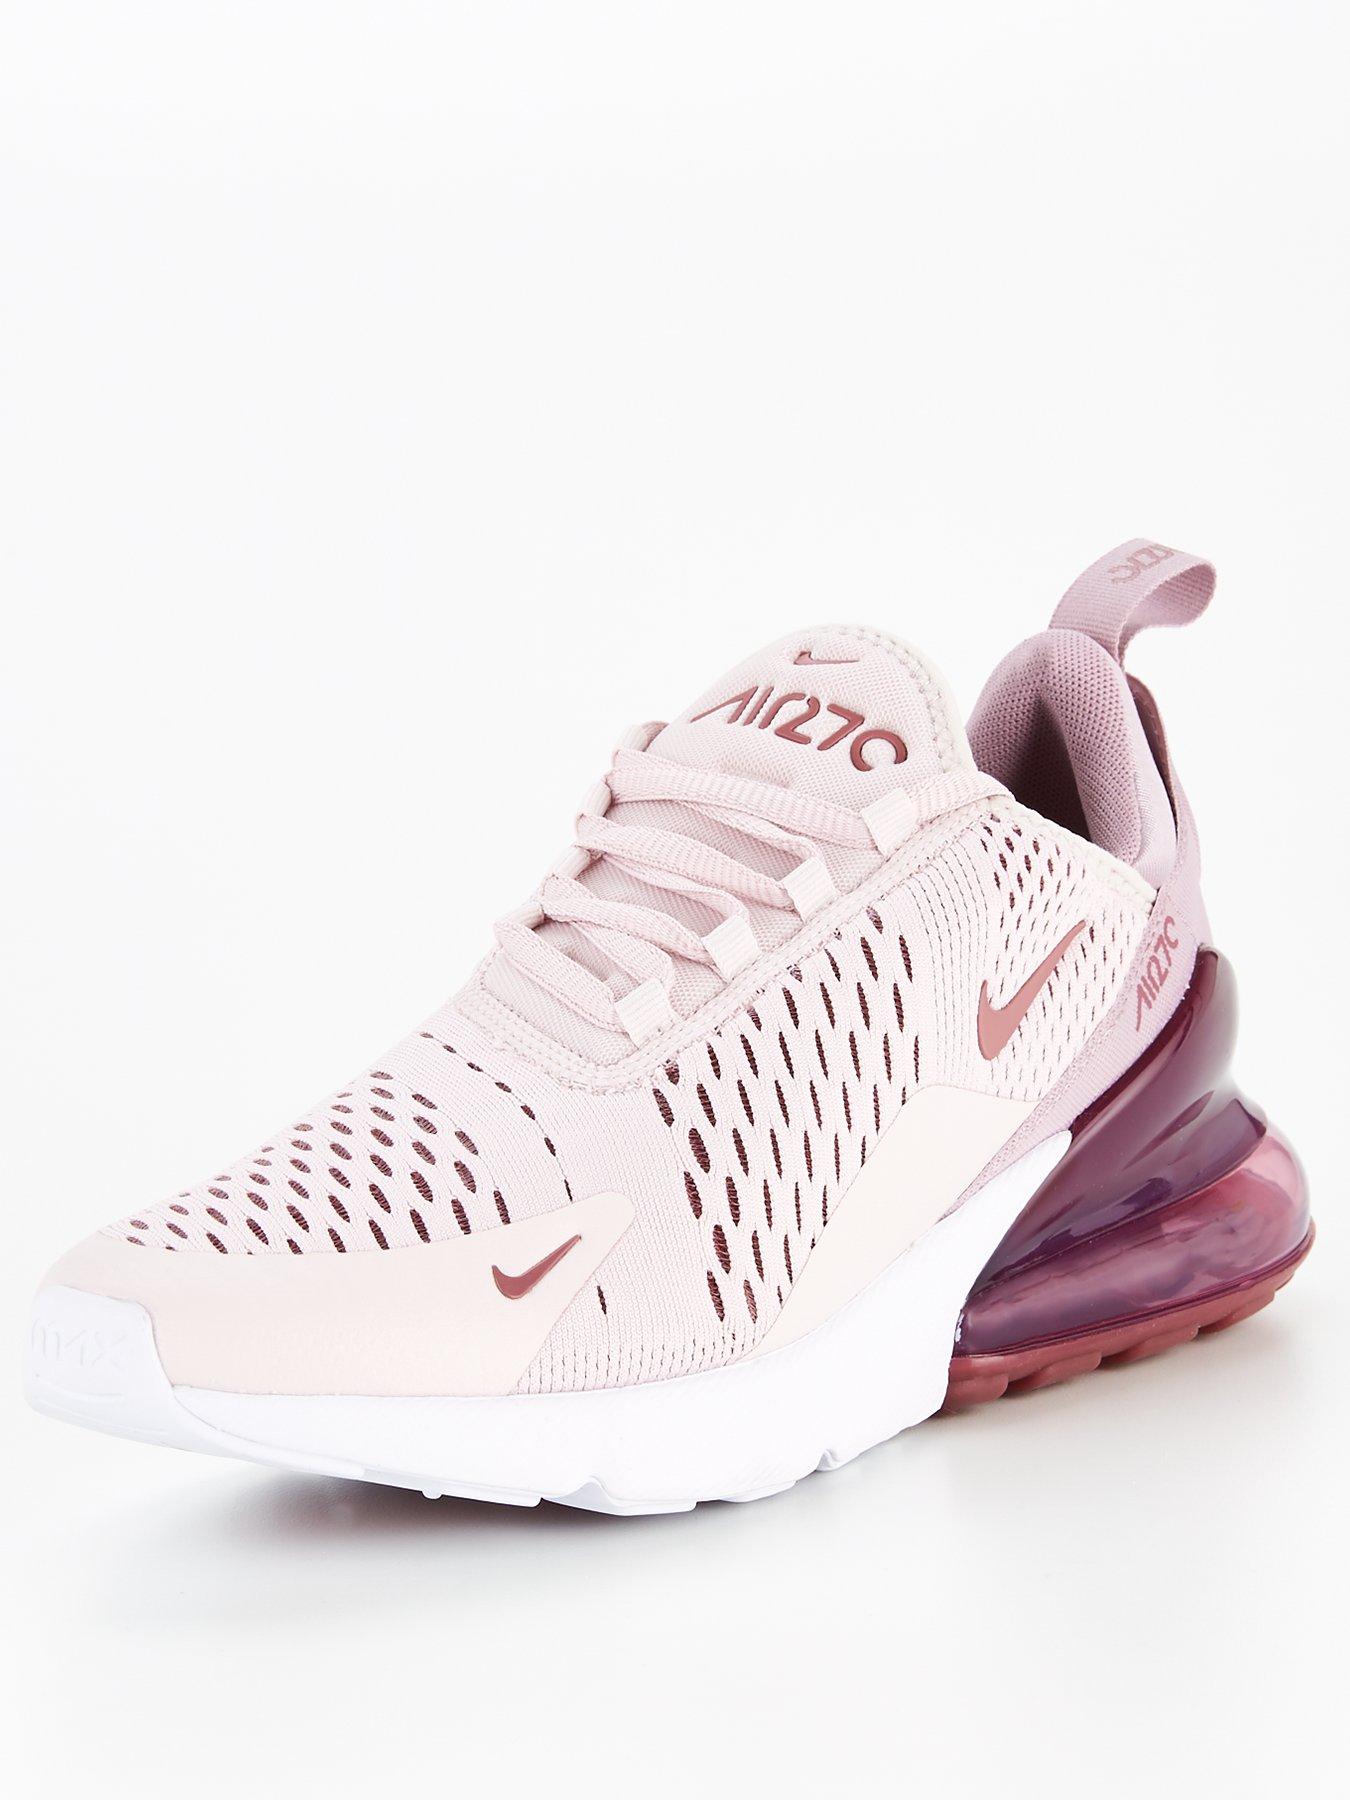 Women Air Max 270 - Pink/Red